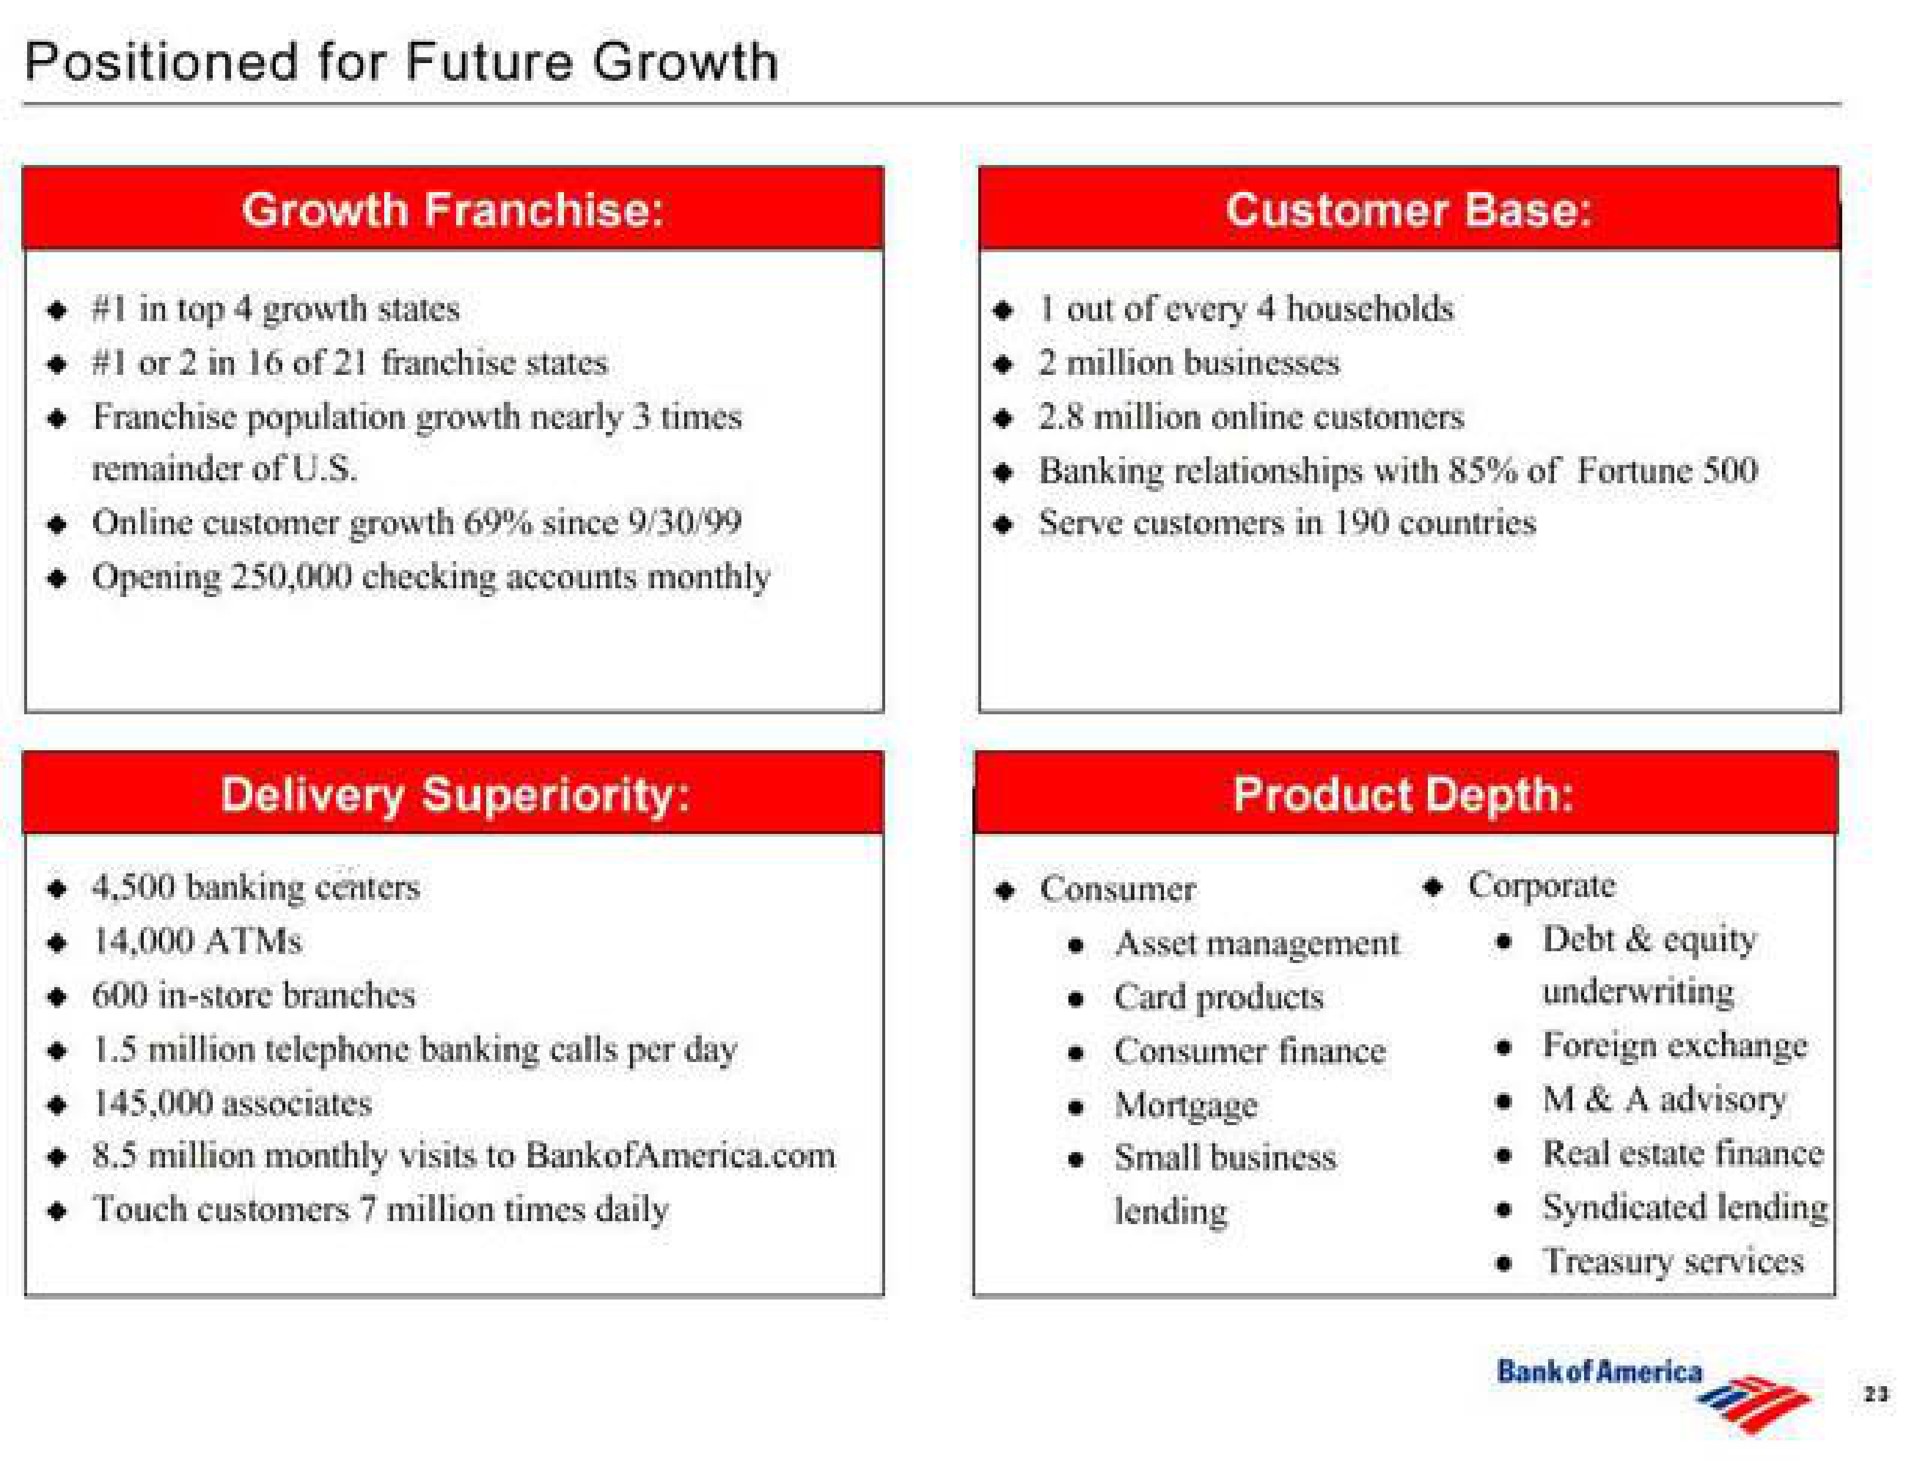 positioned for future growth | Bank of America